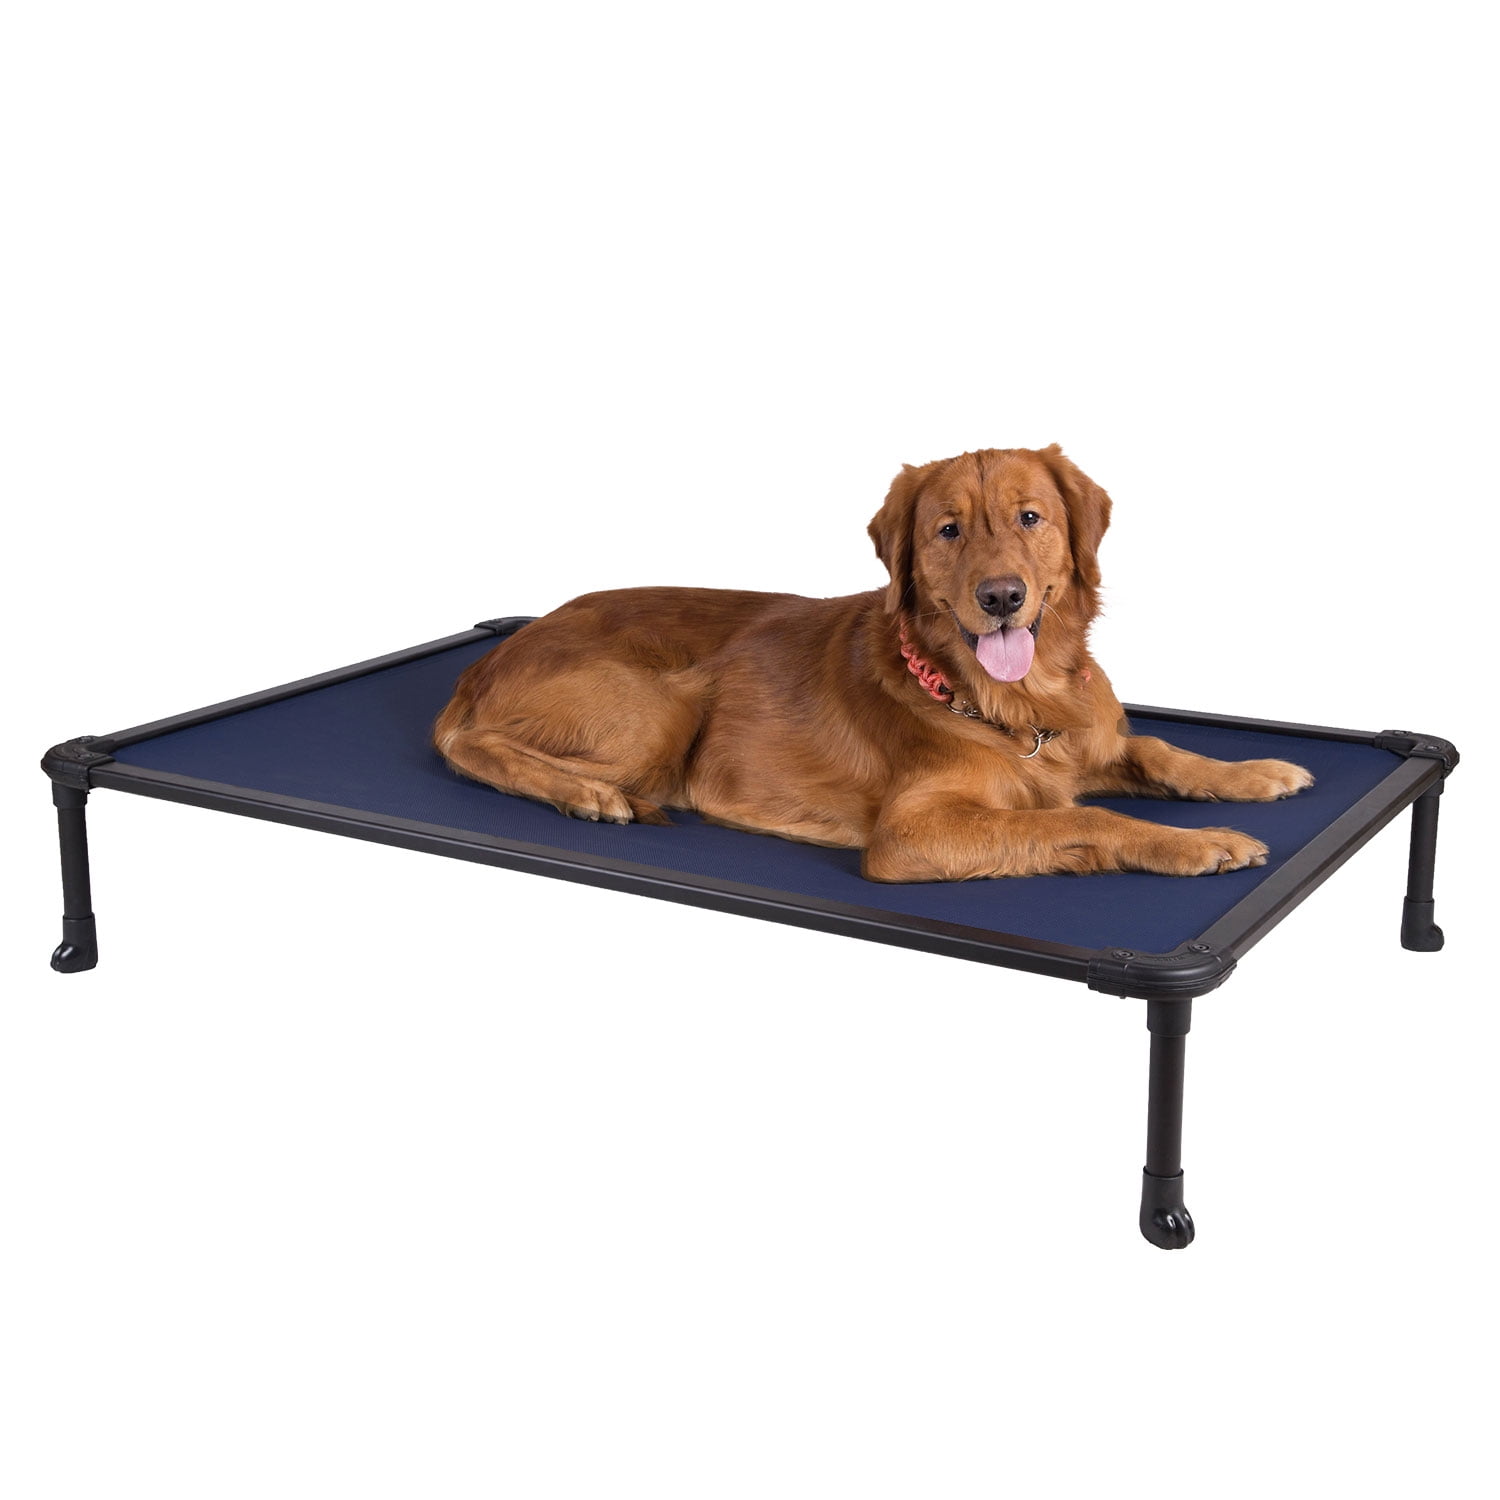 Rustless Aluminum Frame and Durable Textilene Mesh Fabric Veehoo Chew Proof Elevated Dog Bed Cooling Raised Pet Cot Unique Designed No-Slip Feet for Indoor or Outdoor Use 